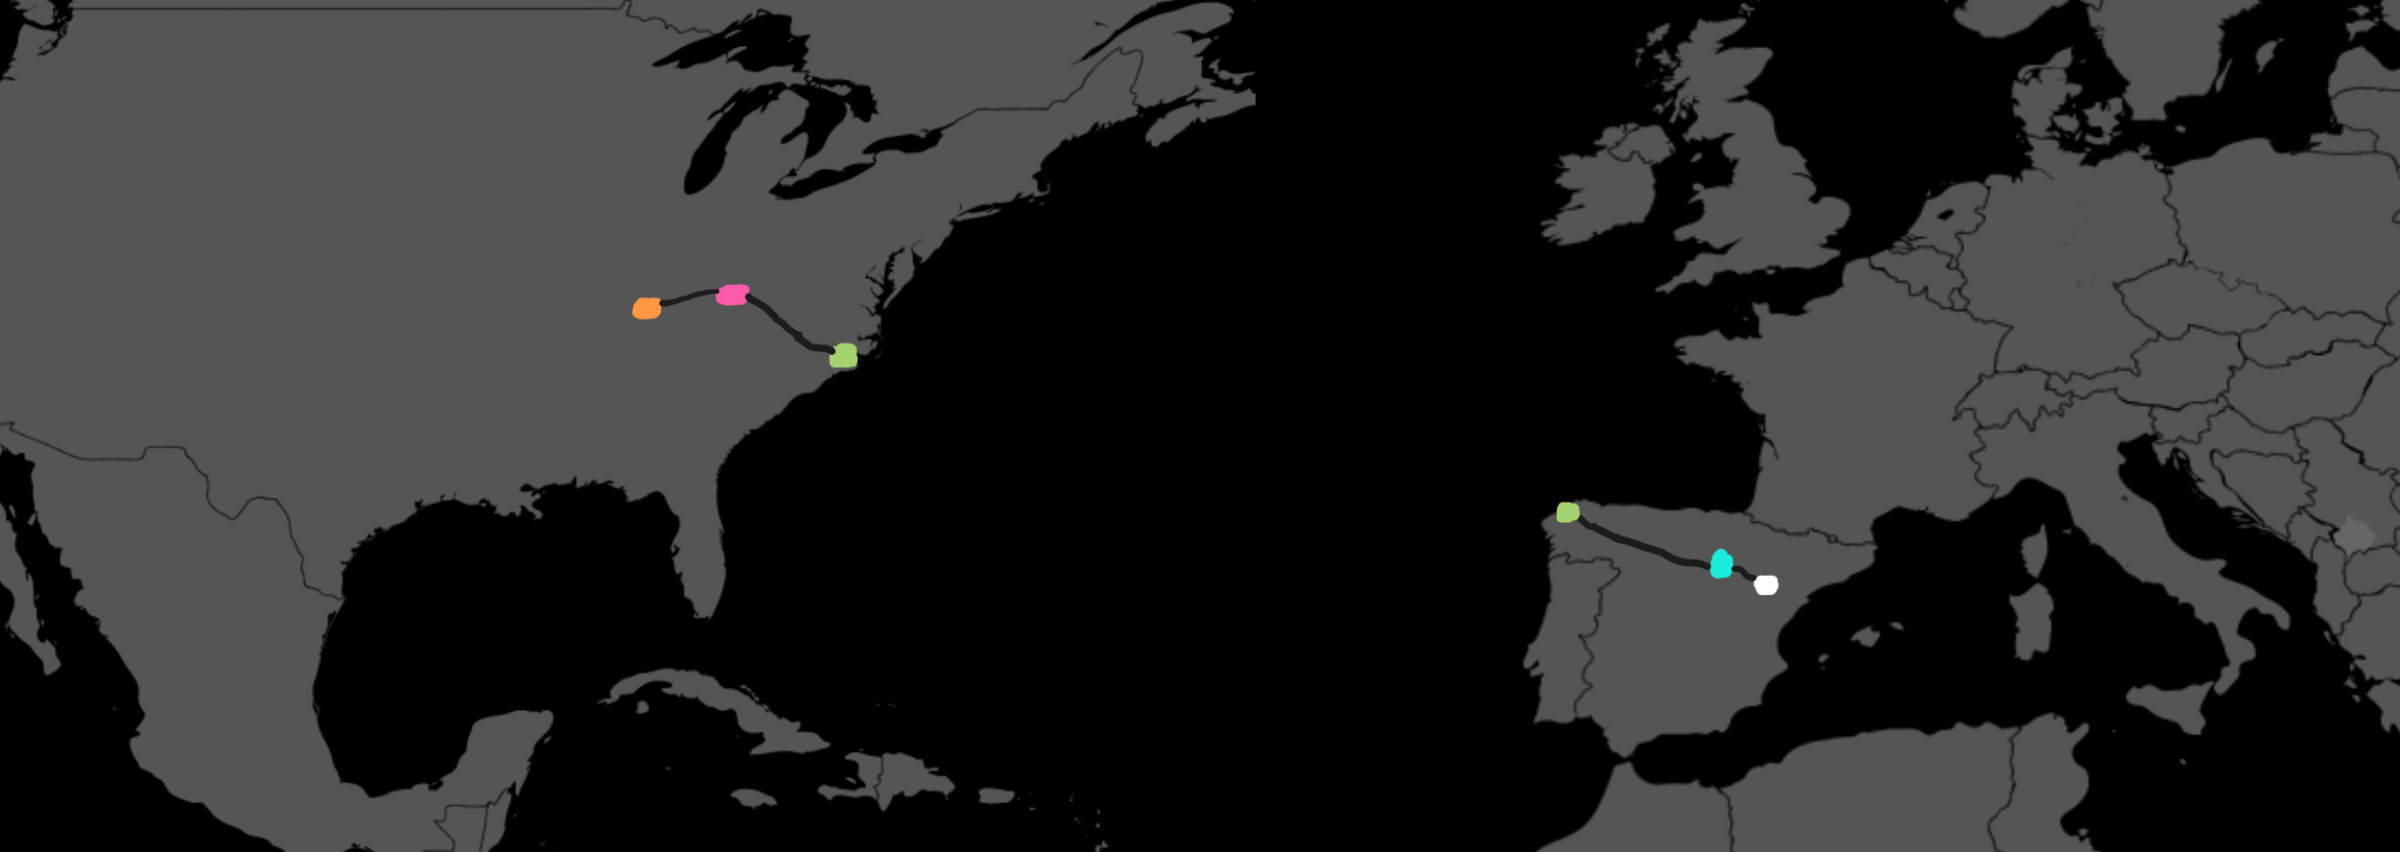 World map, where the Google server and its network is in America, while the home network is in Europe